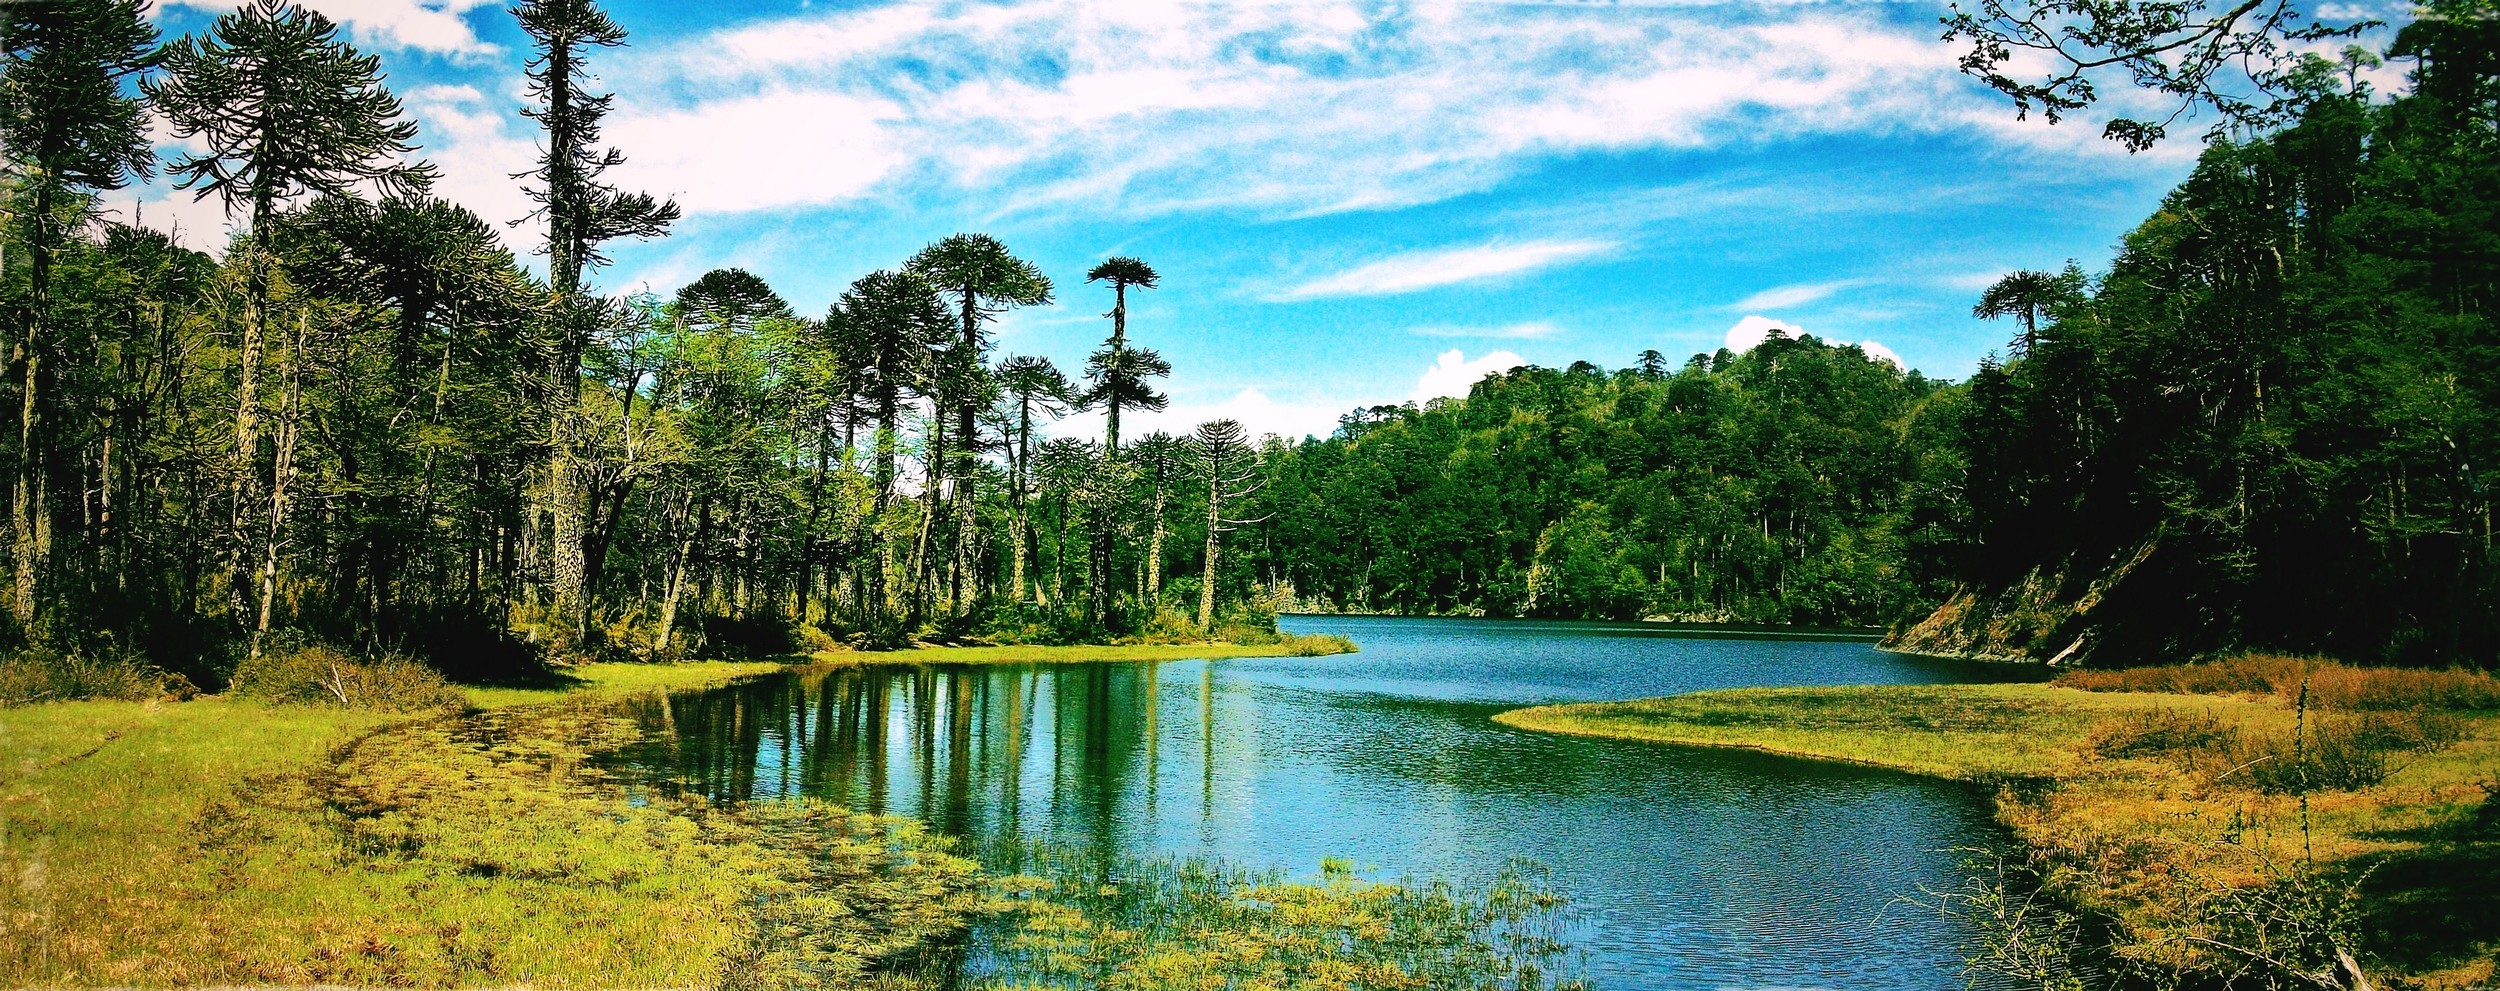 Lake Chile Forest Clouds Grass Trees Monkey Puzzle Tree Reflection Hills Nature Landscape Water Gree 2500x991